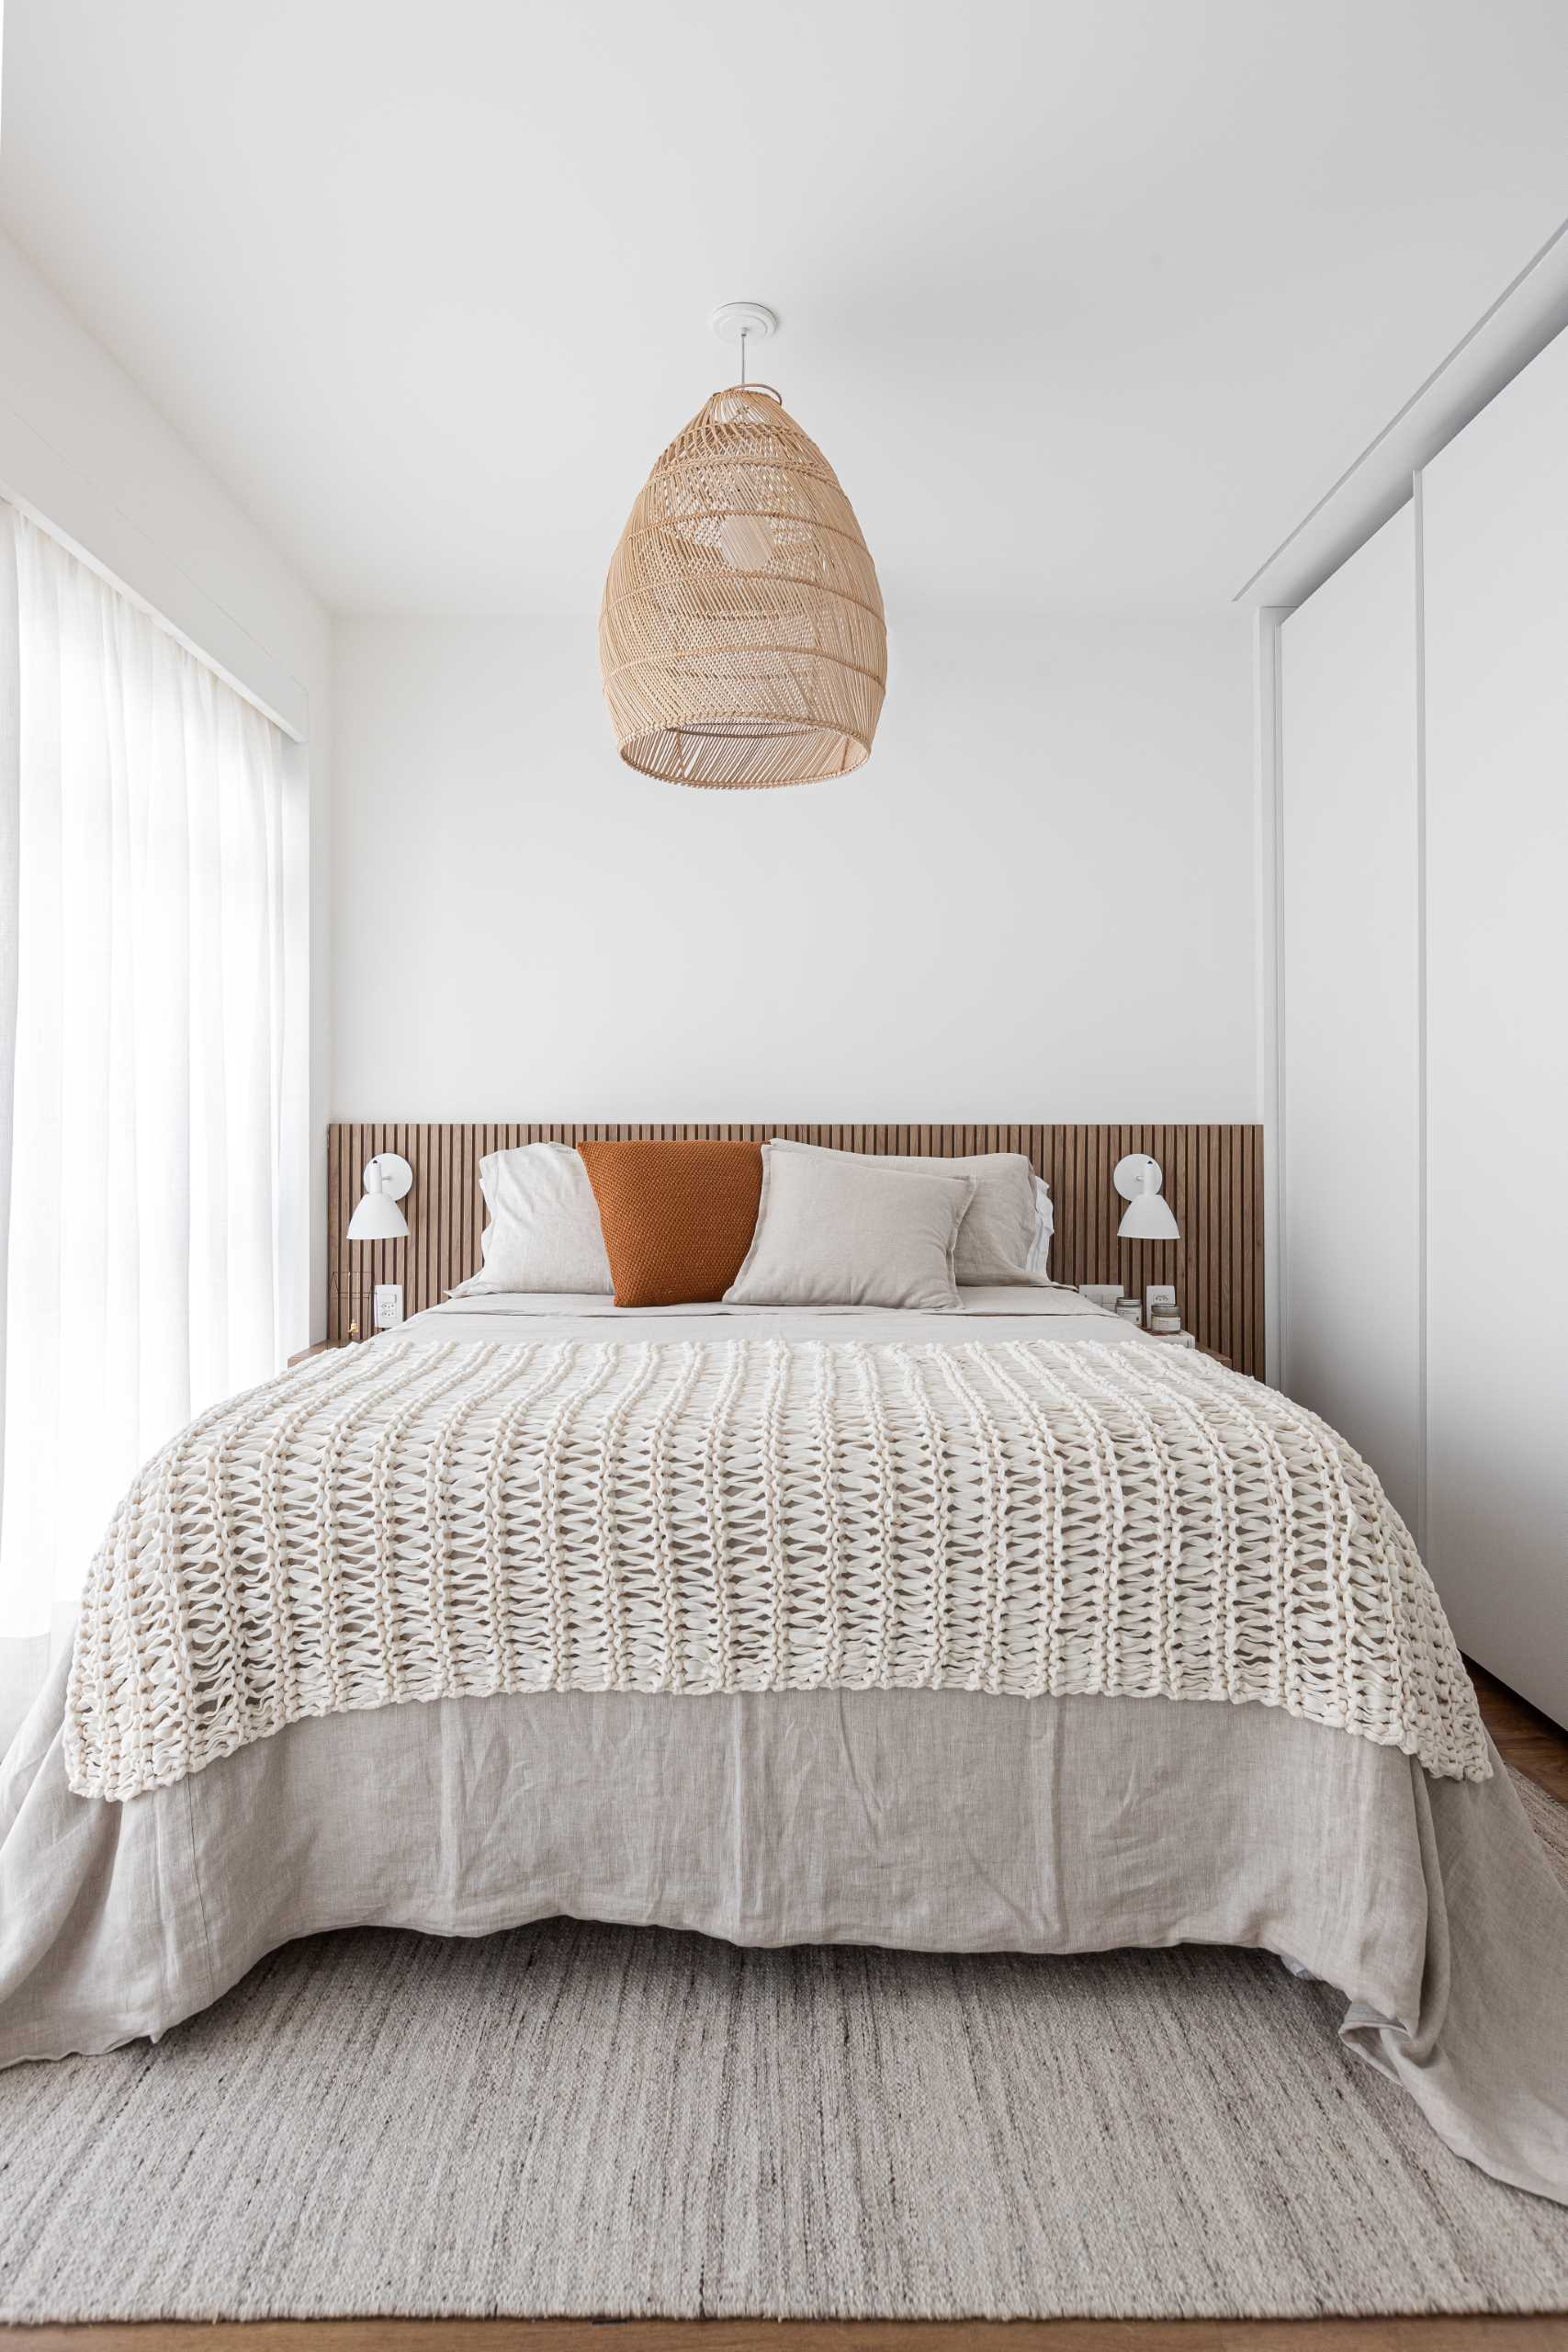 A modern bedroom with a natural color palette.